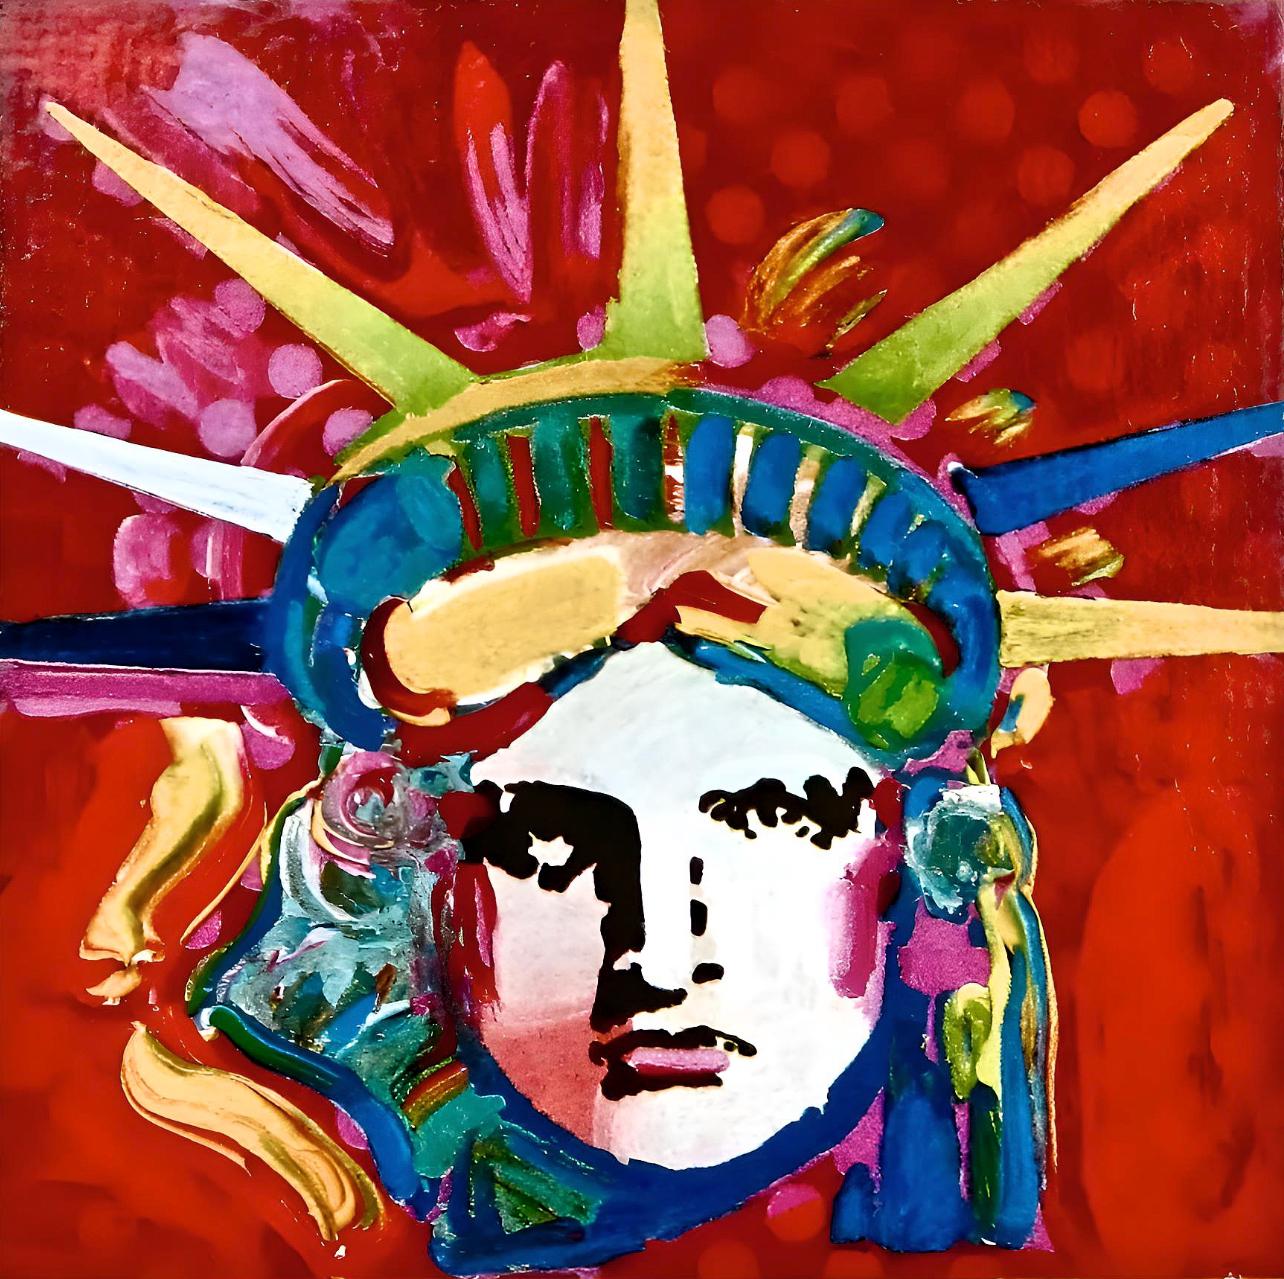 Artist: Peter Max (1937)
Title: Liberty Head IV
Year: 2001
Edition: 454/500, plus proofs
Medium: Lithograph on Lustro Saxony paper
Size: 3.5 x 3 inches
Condition: Excellent
Inscription: Signed and numbered by the artist.
Notes: Published by Via